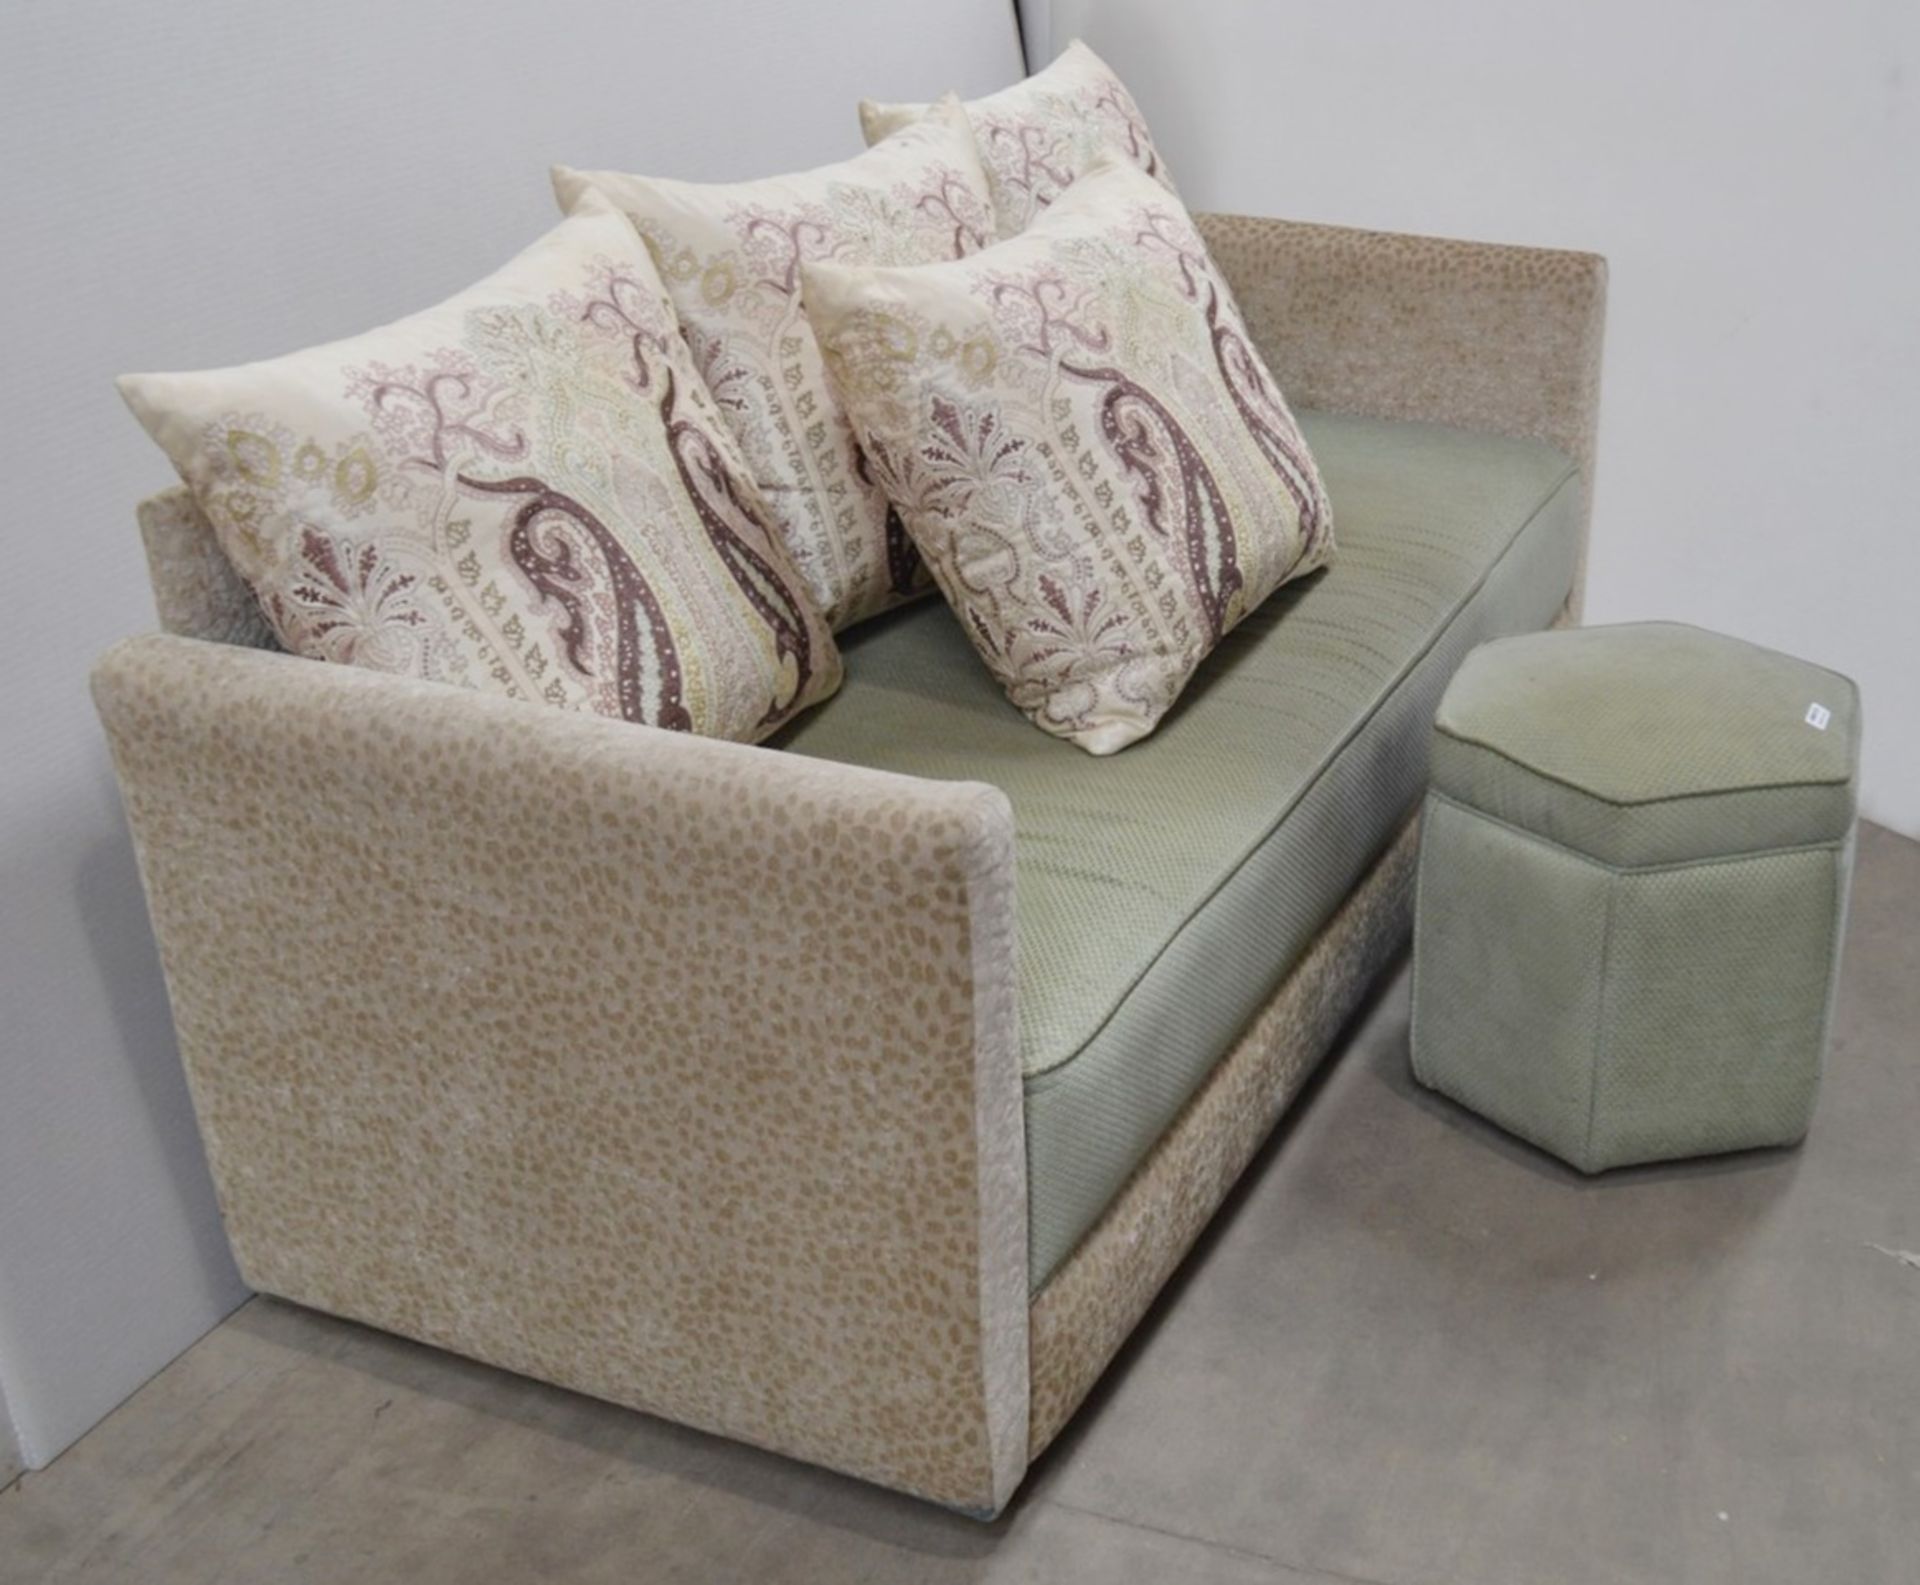 1 x Upholstered Sofa With 4 x Cushions, Pale Green Seat Cushion With Matching Footstool - Ref: